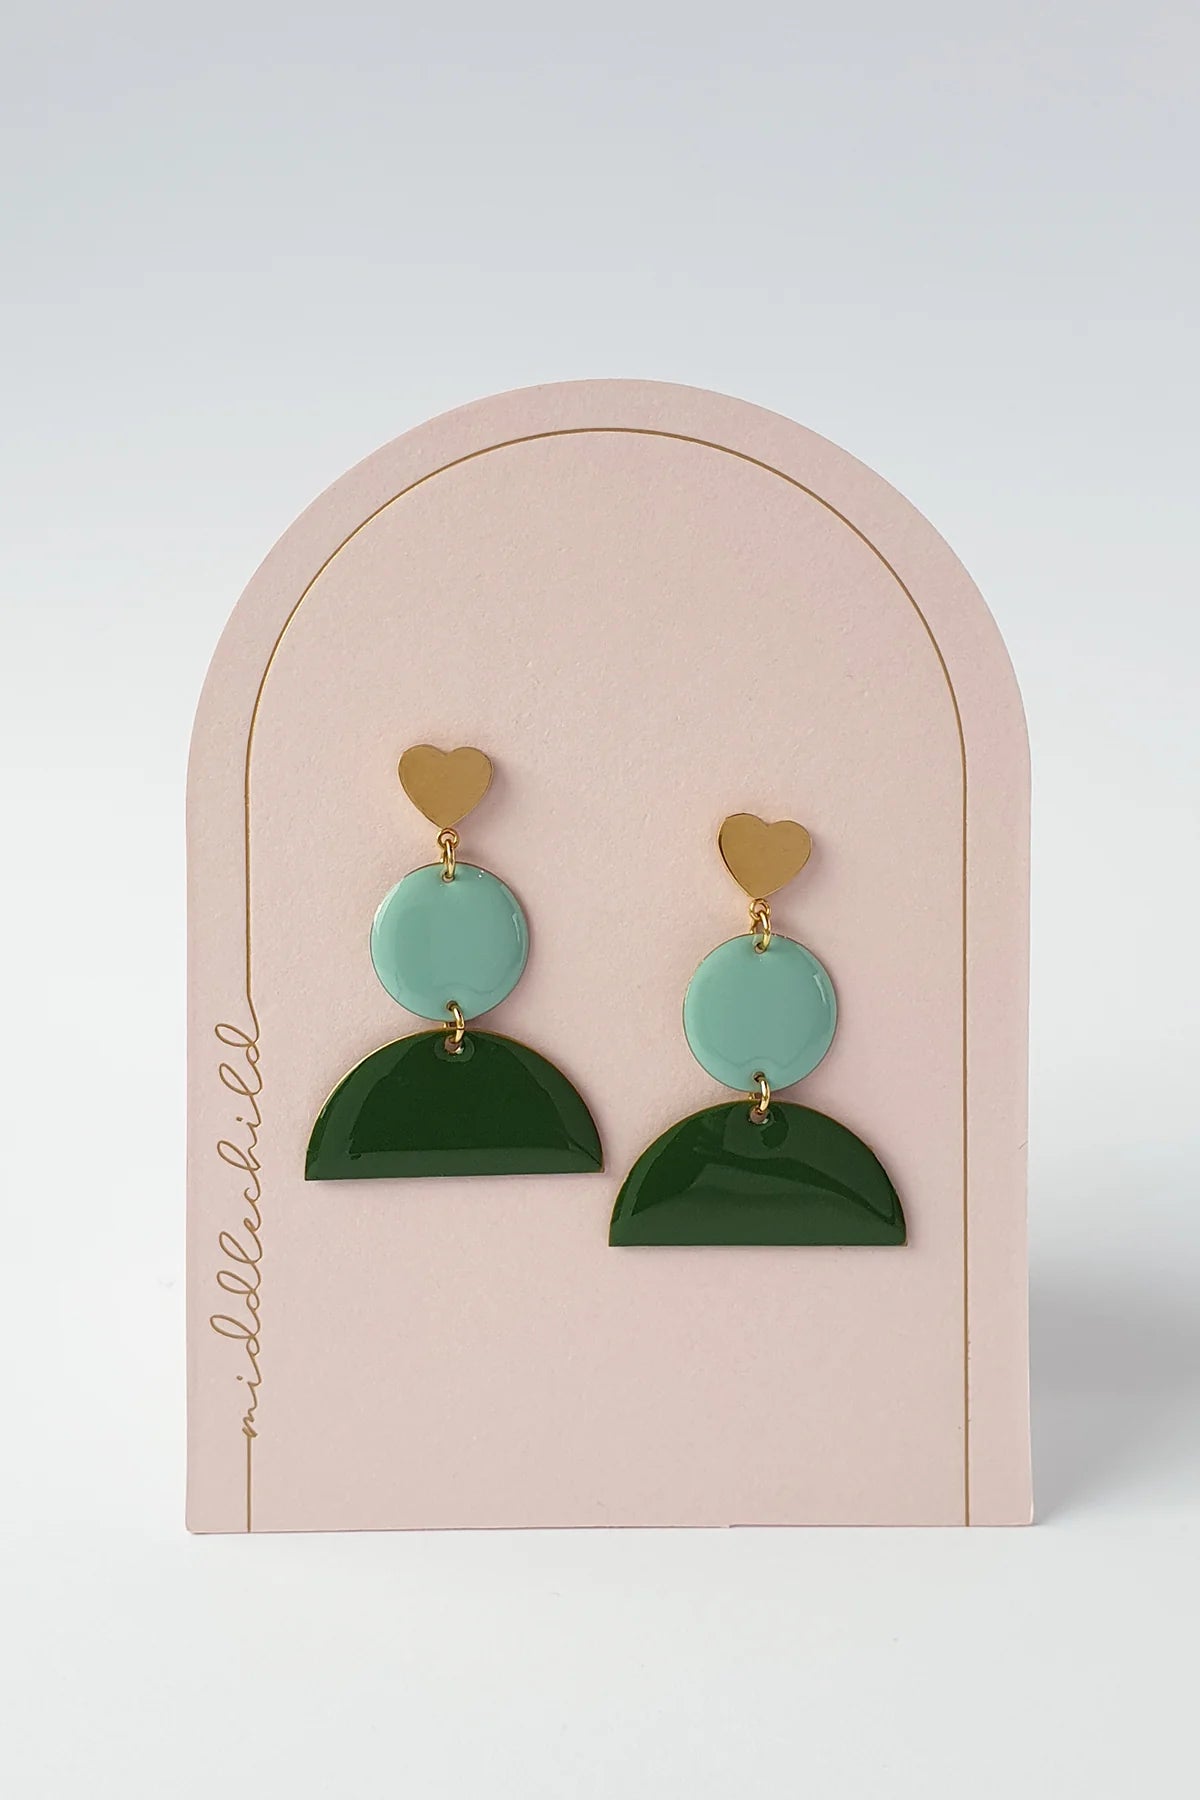 Middle Child - Bisous Earrings